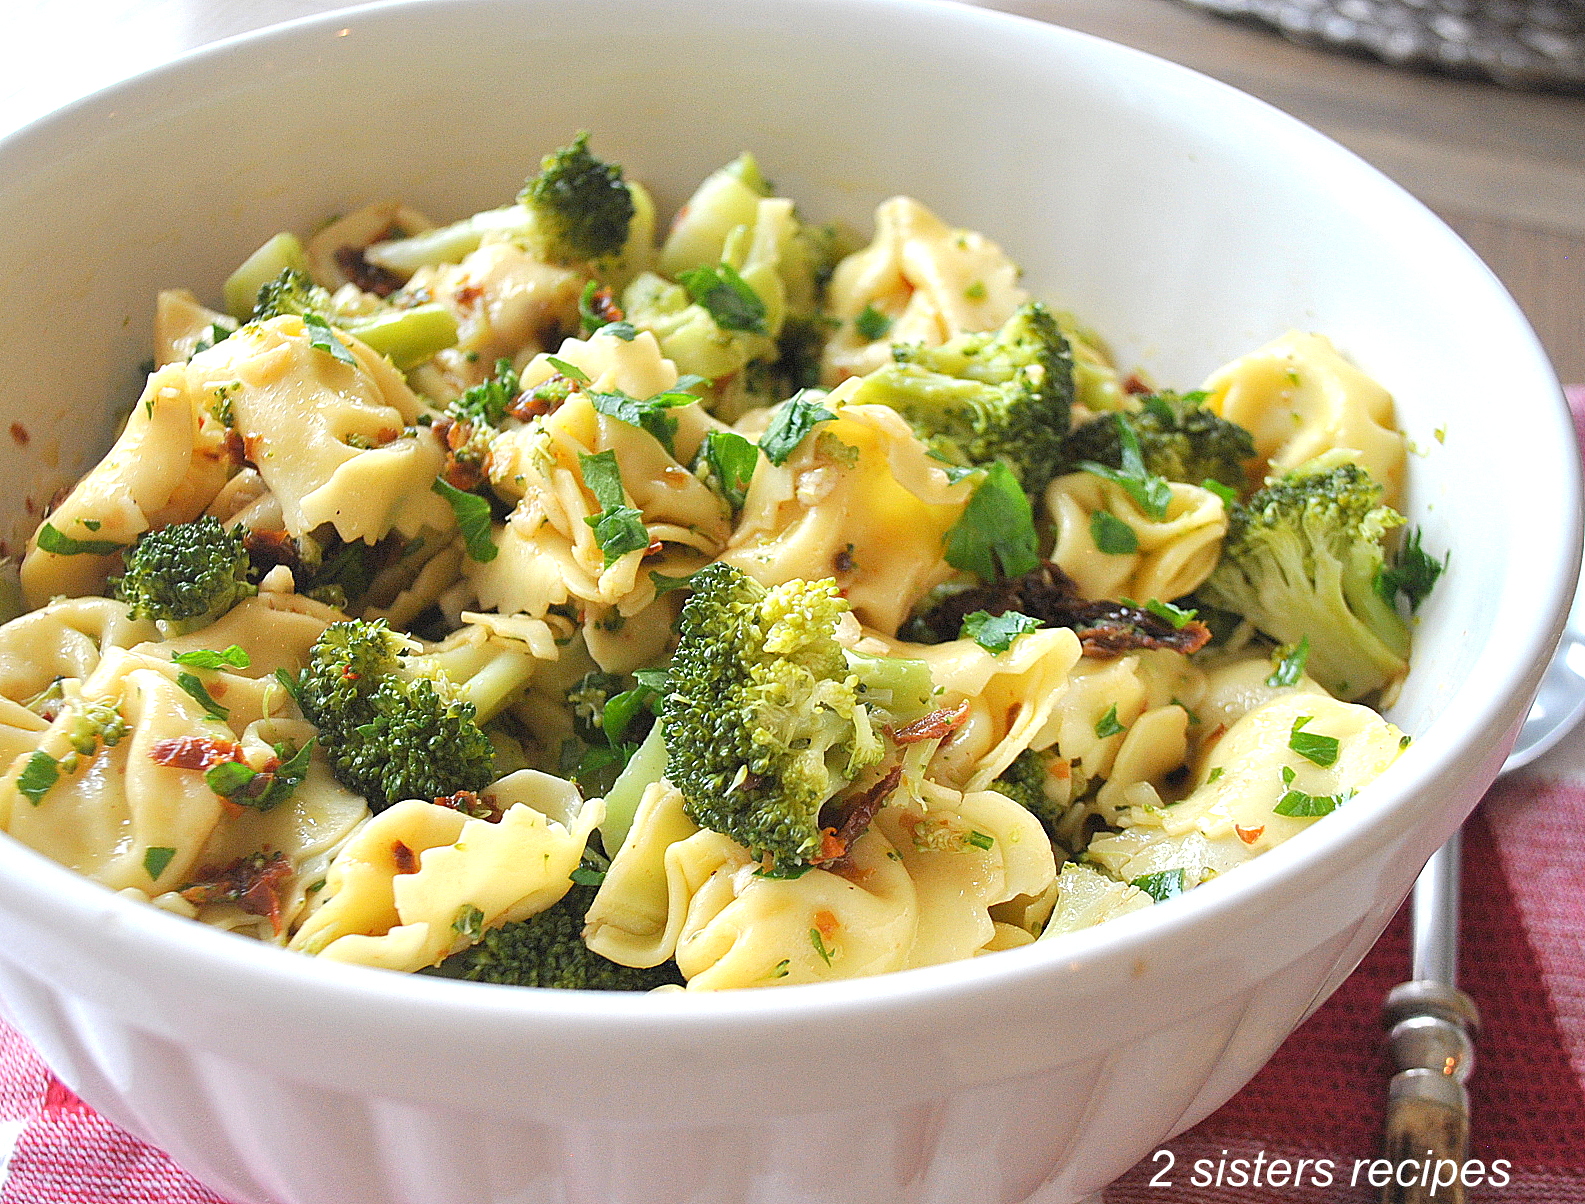 Tortellini and Broccoli Salad - 2 Sisters Recipes by Anna and Liz